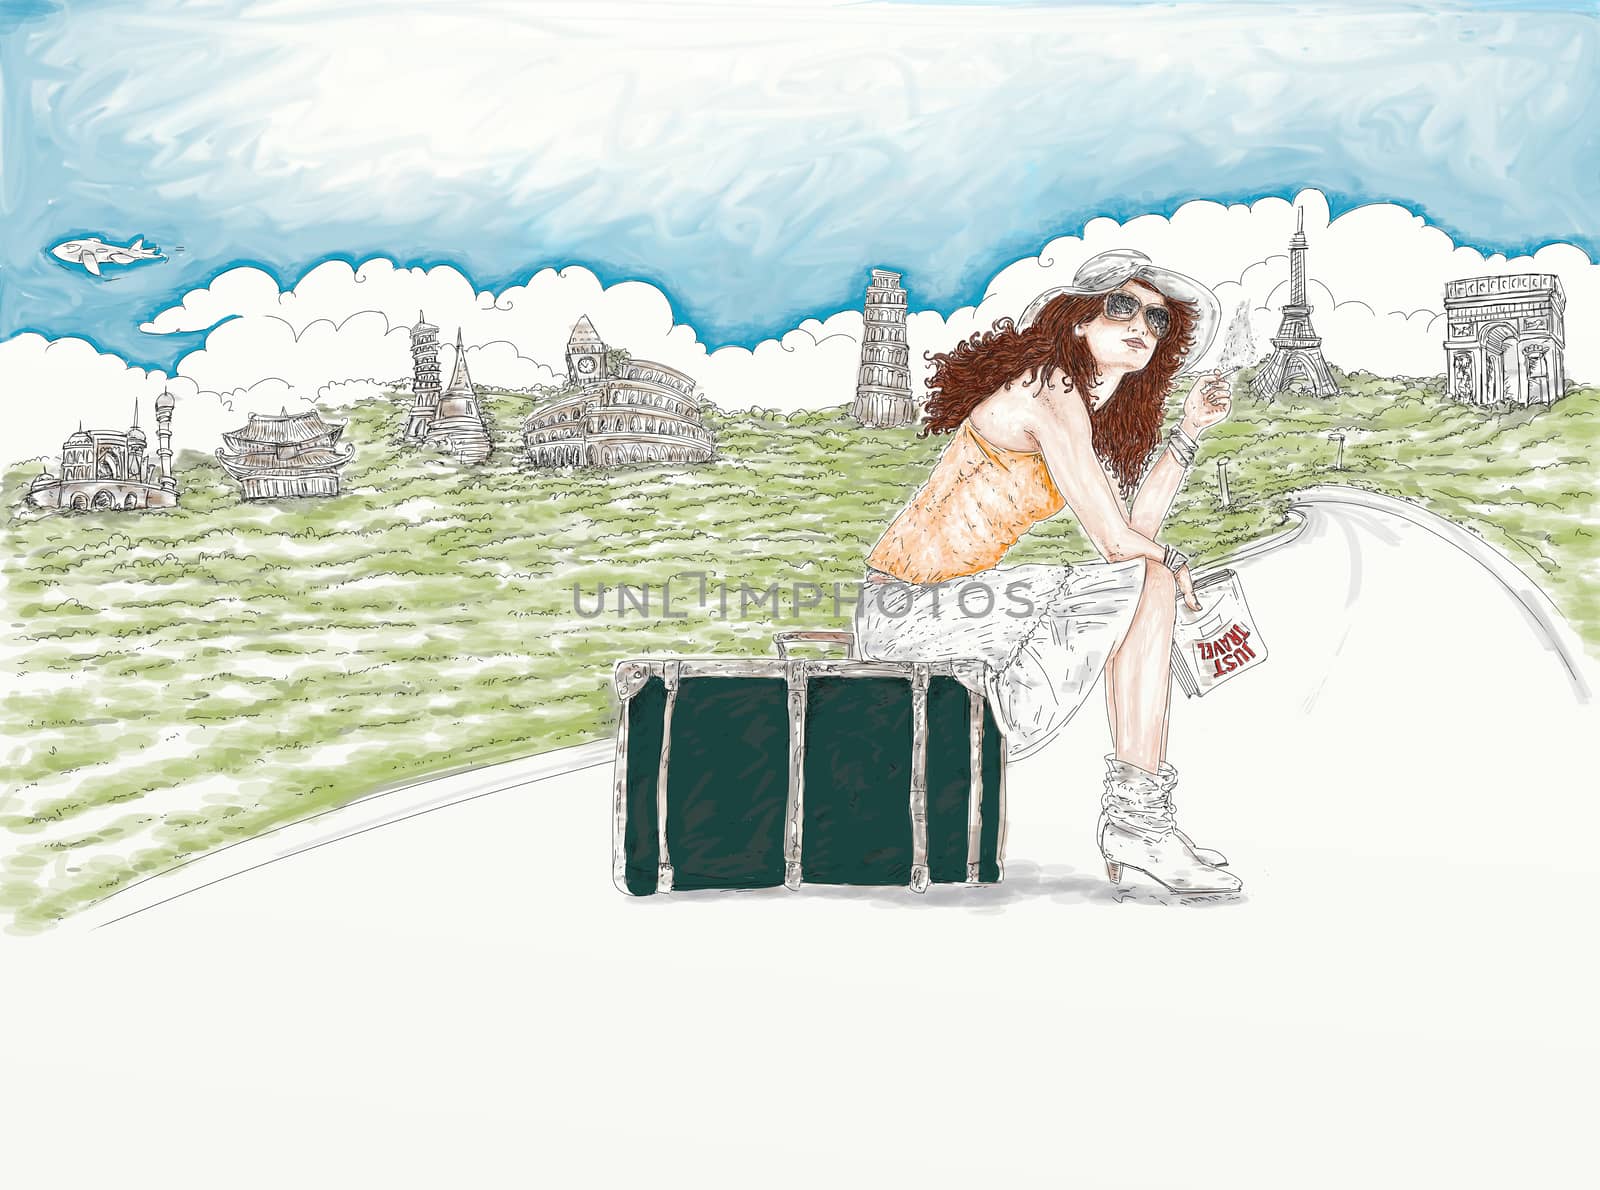 Woman with a suitcase thinking about where to go,
City in the background.